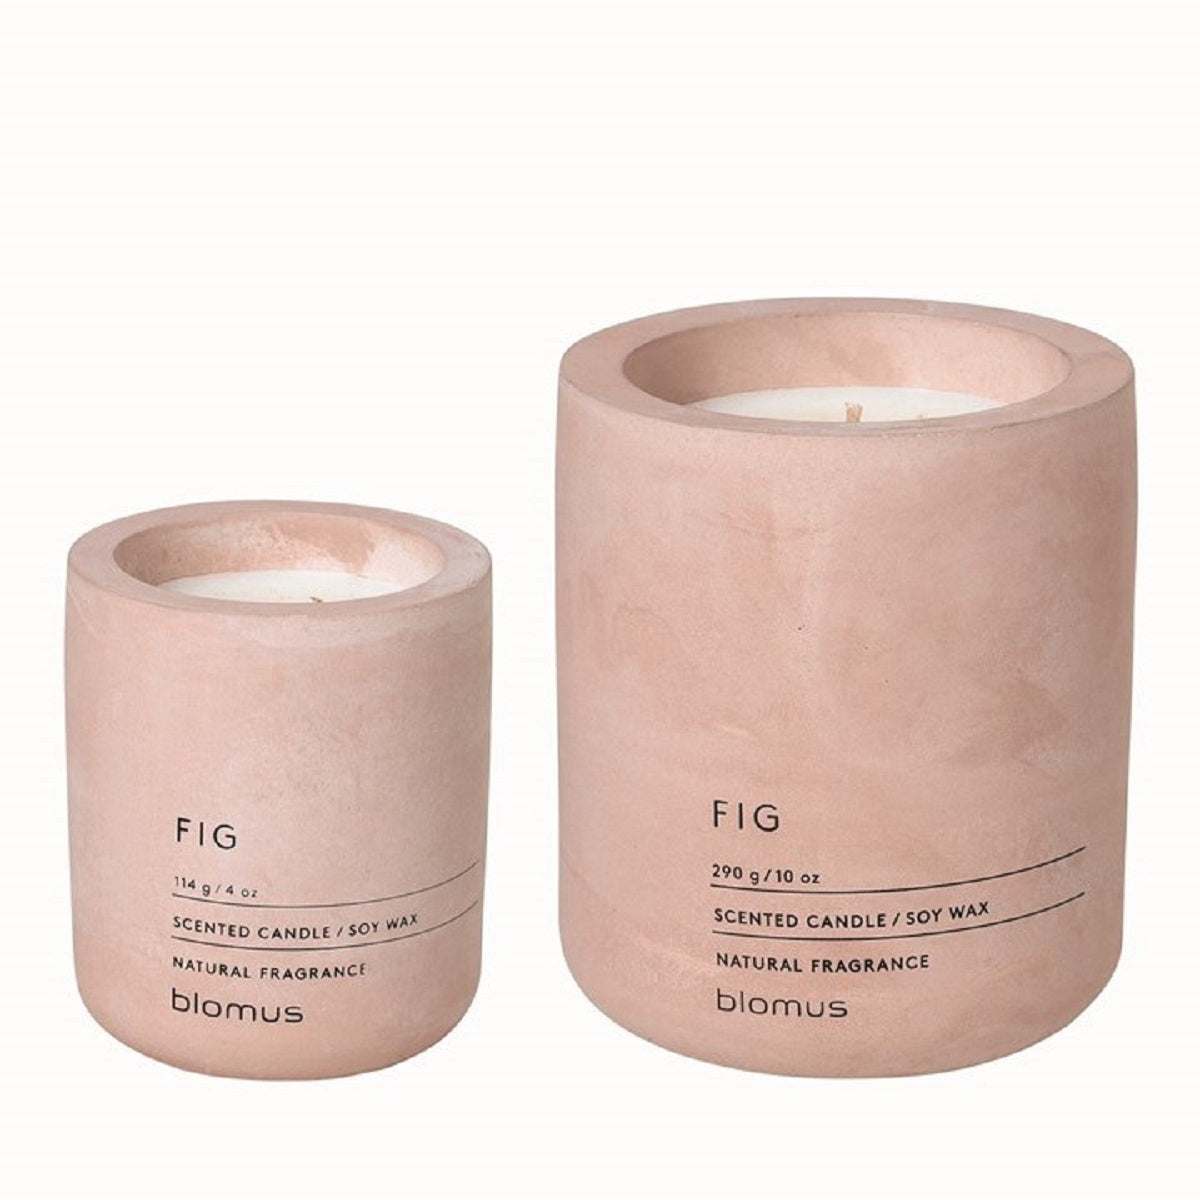 eco friendly 10oz concrete candle making empty jars containers